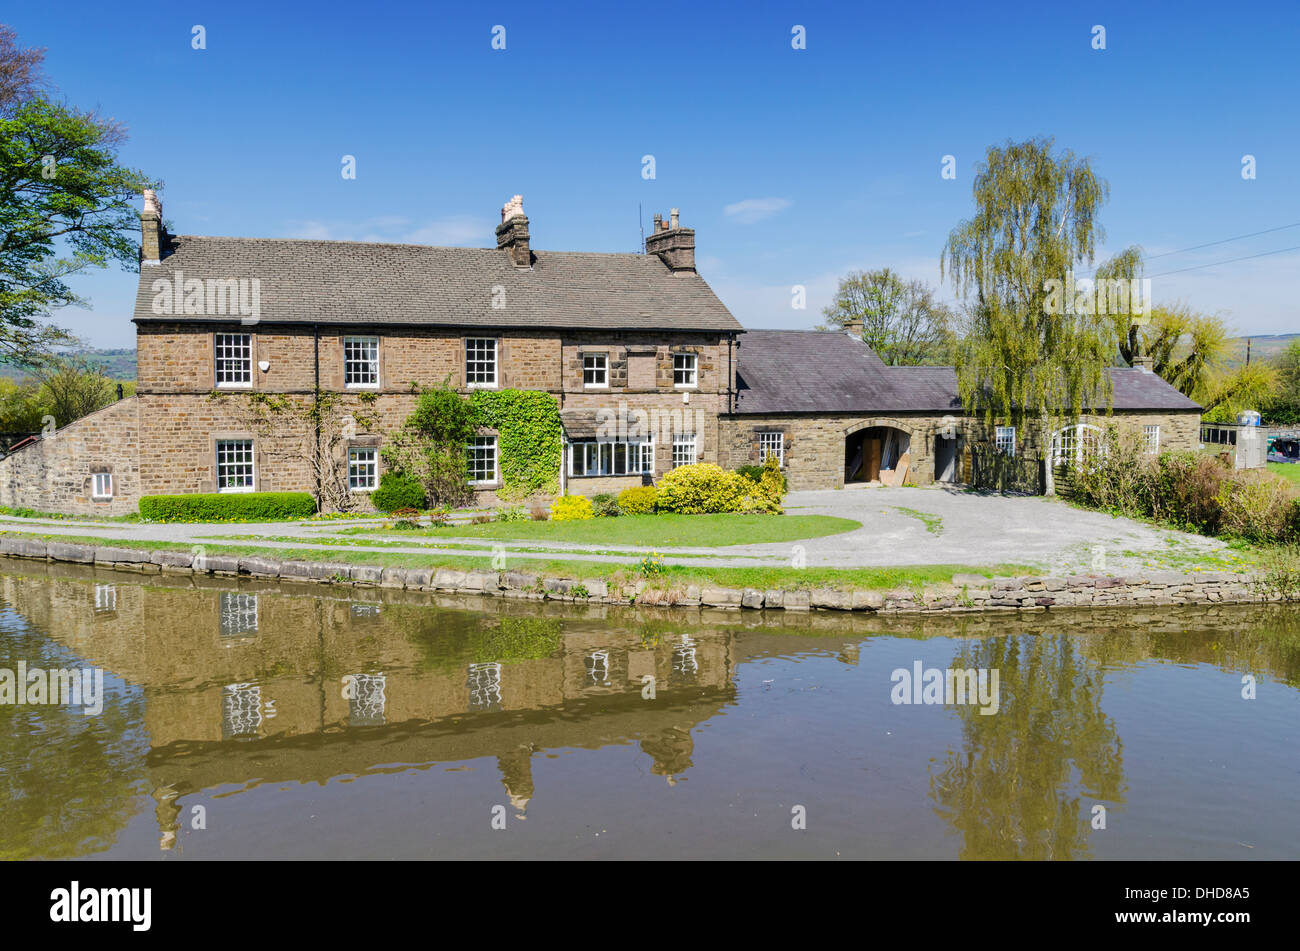 Top Lock House at the junction of the Peak Forest and Macclesfield canals, Marple, Greater Manchester, England Stock Photo